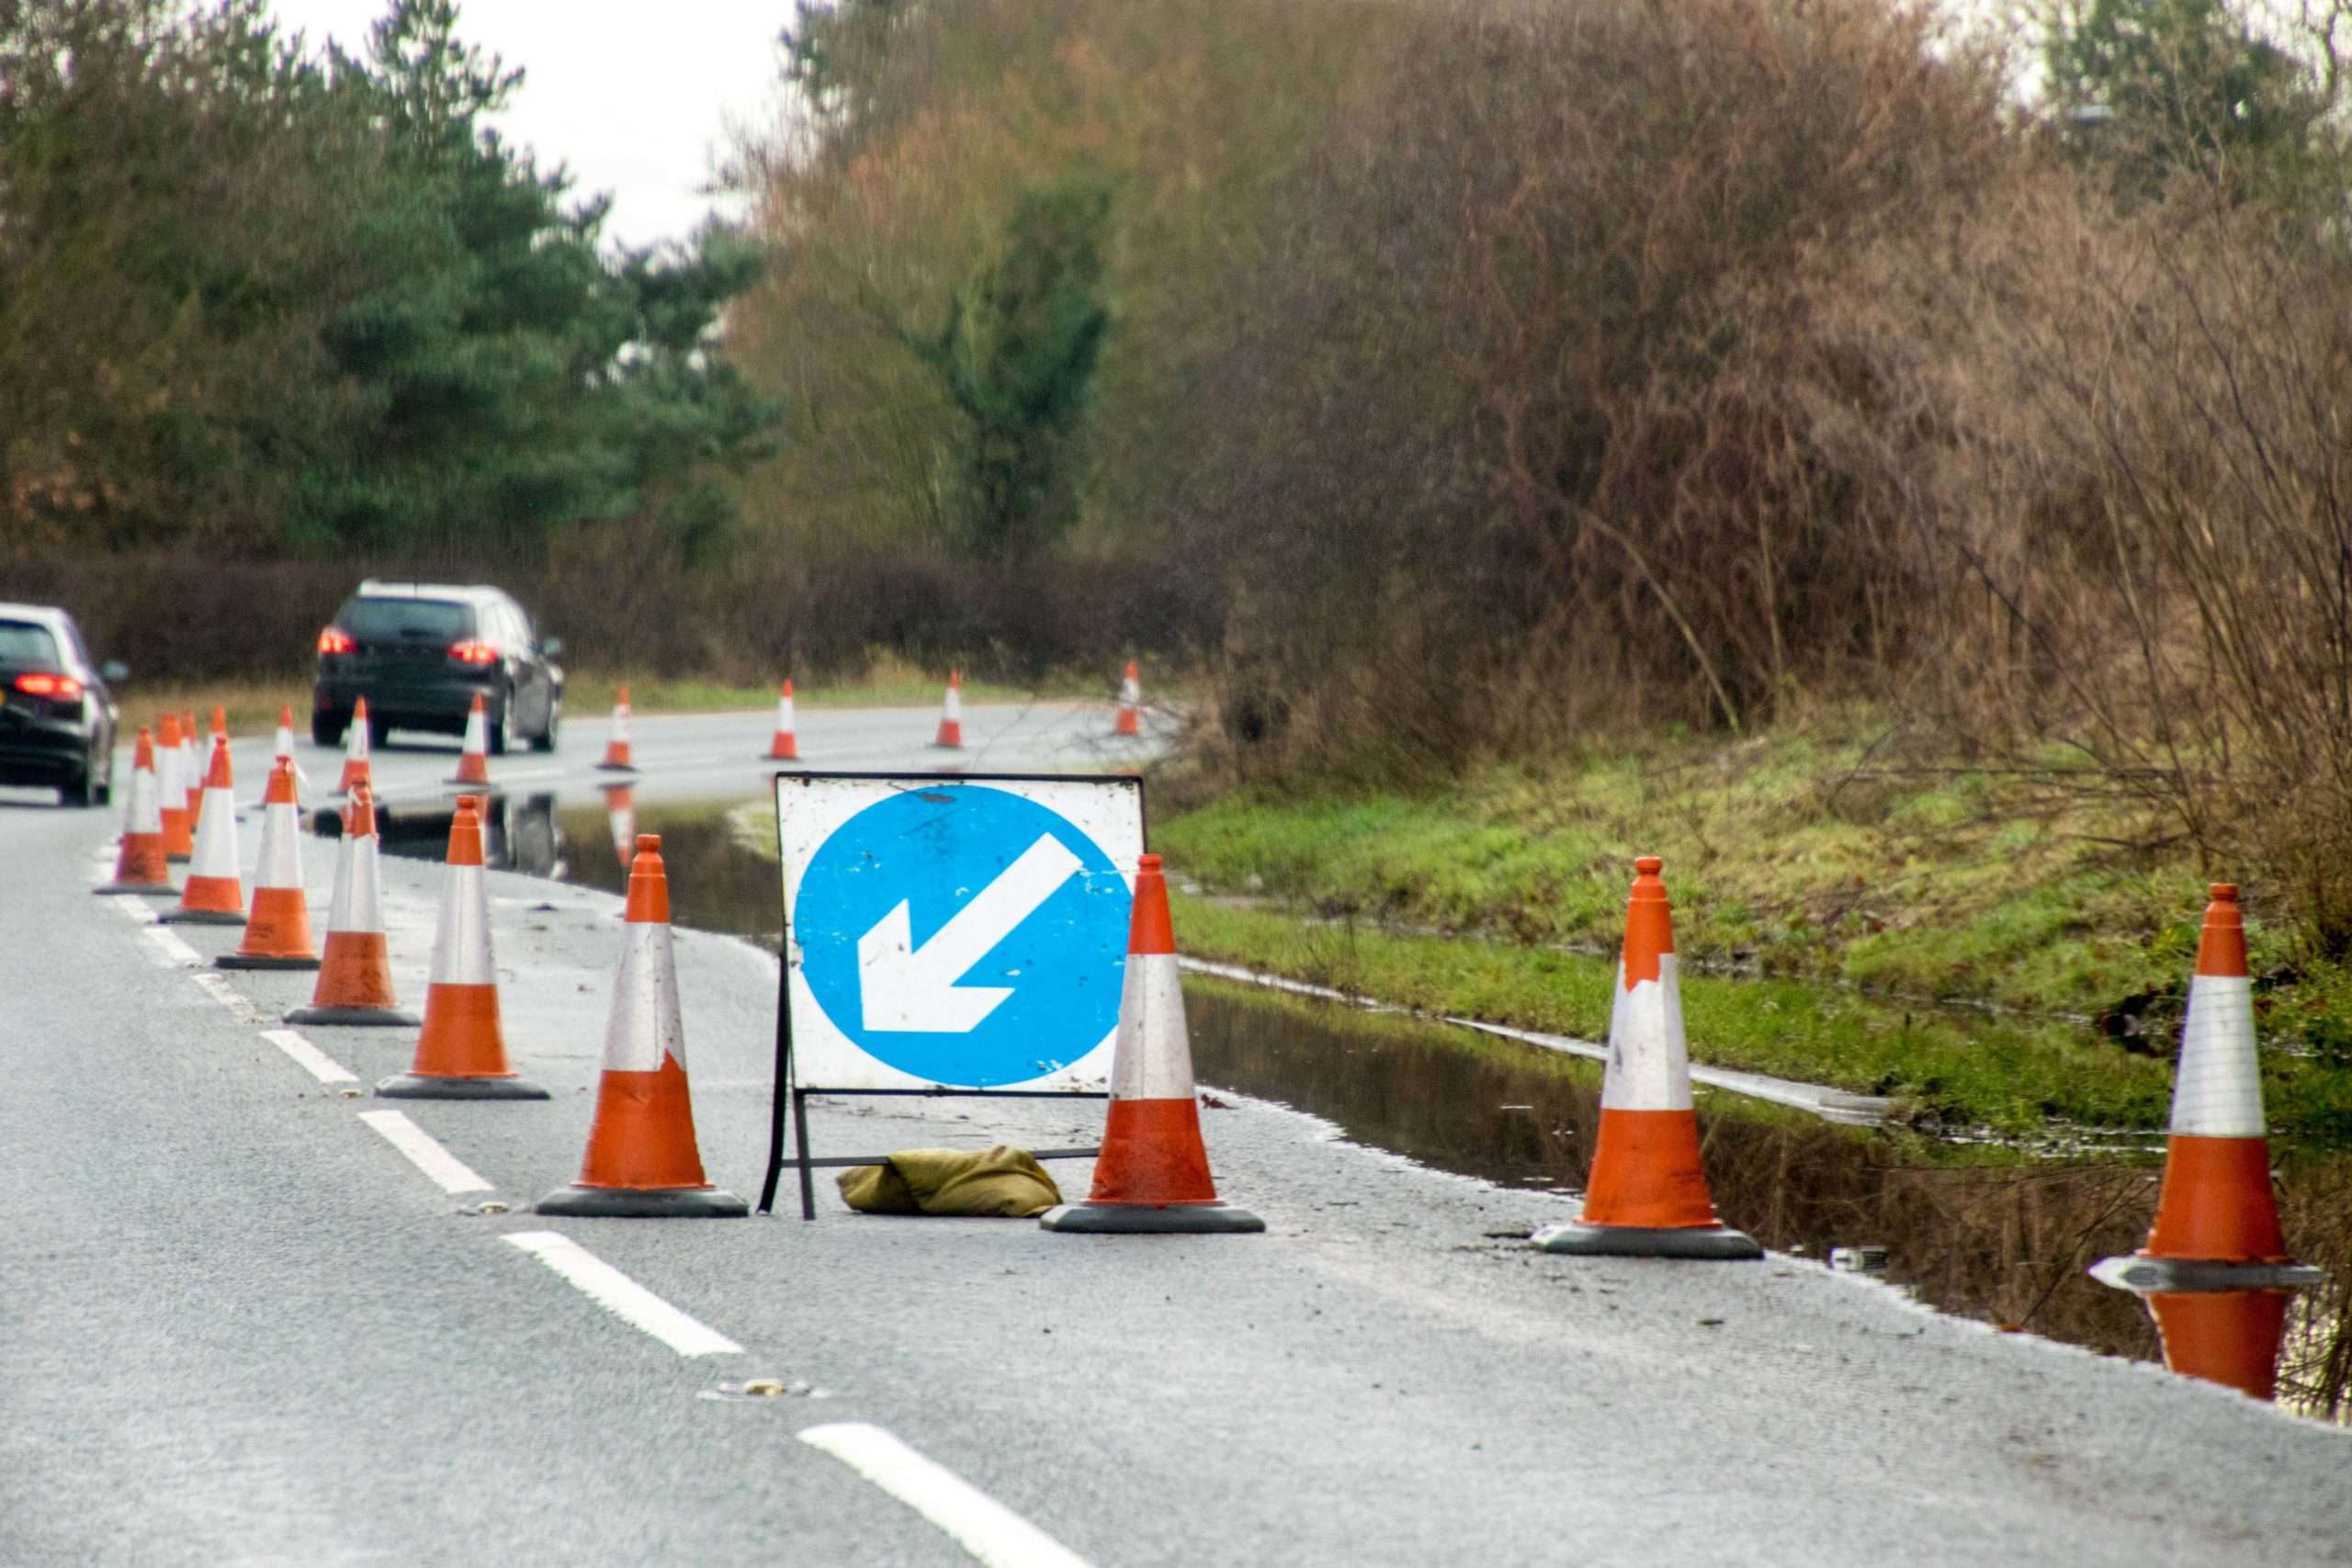 Amount to fix backlog of road repairs almost £700m